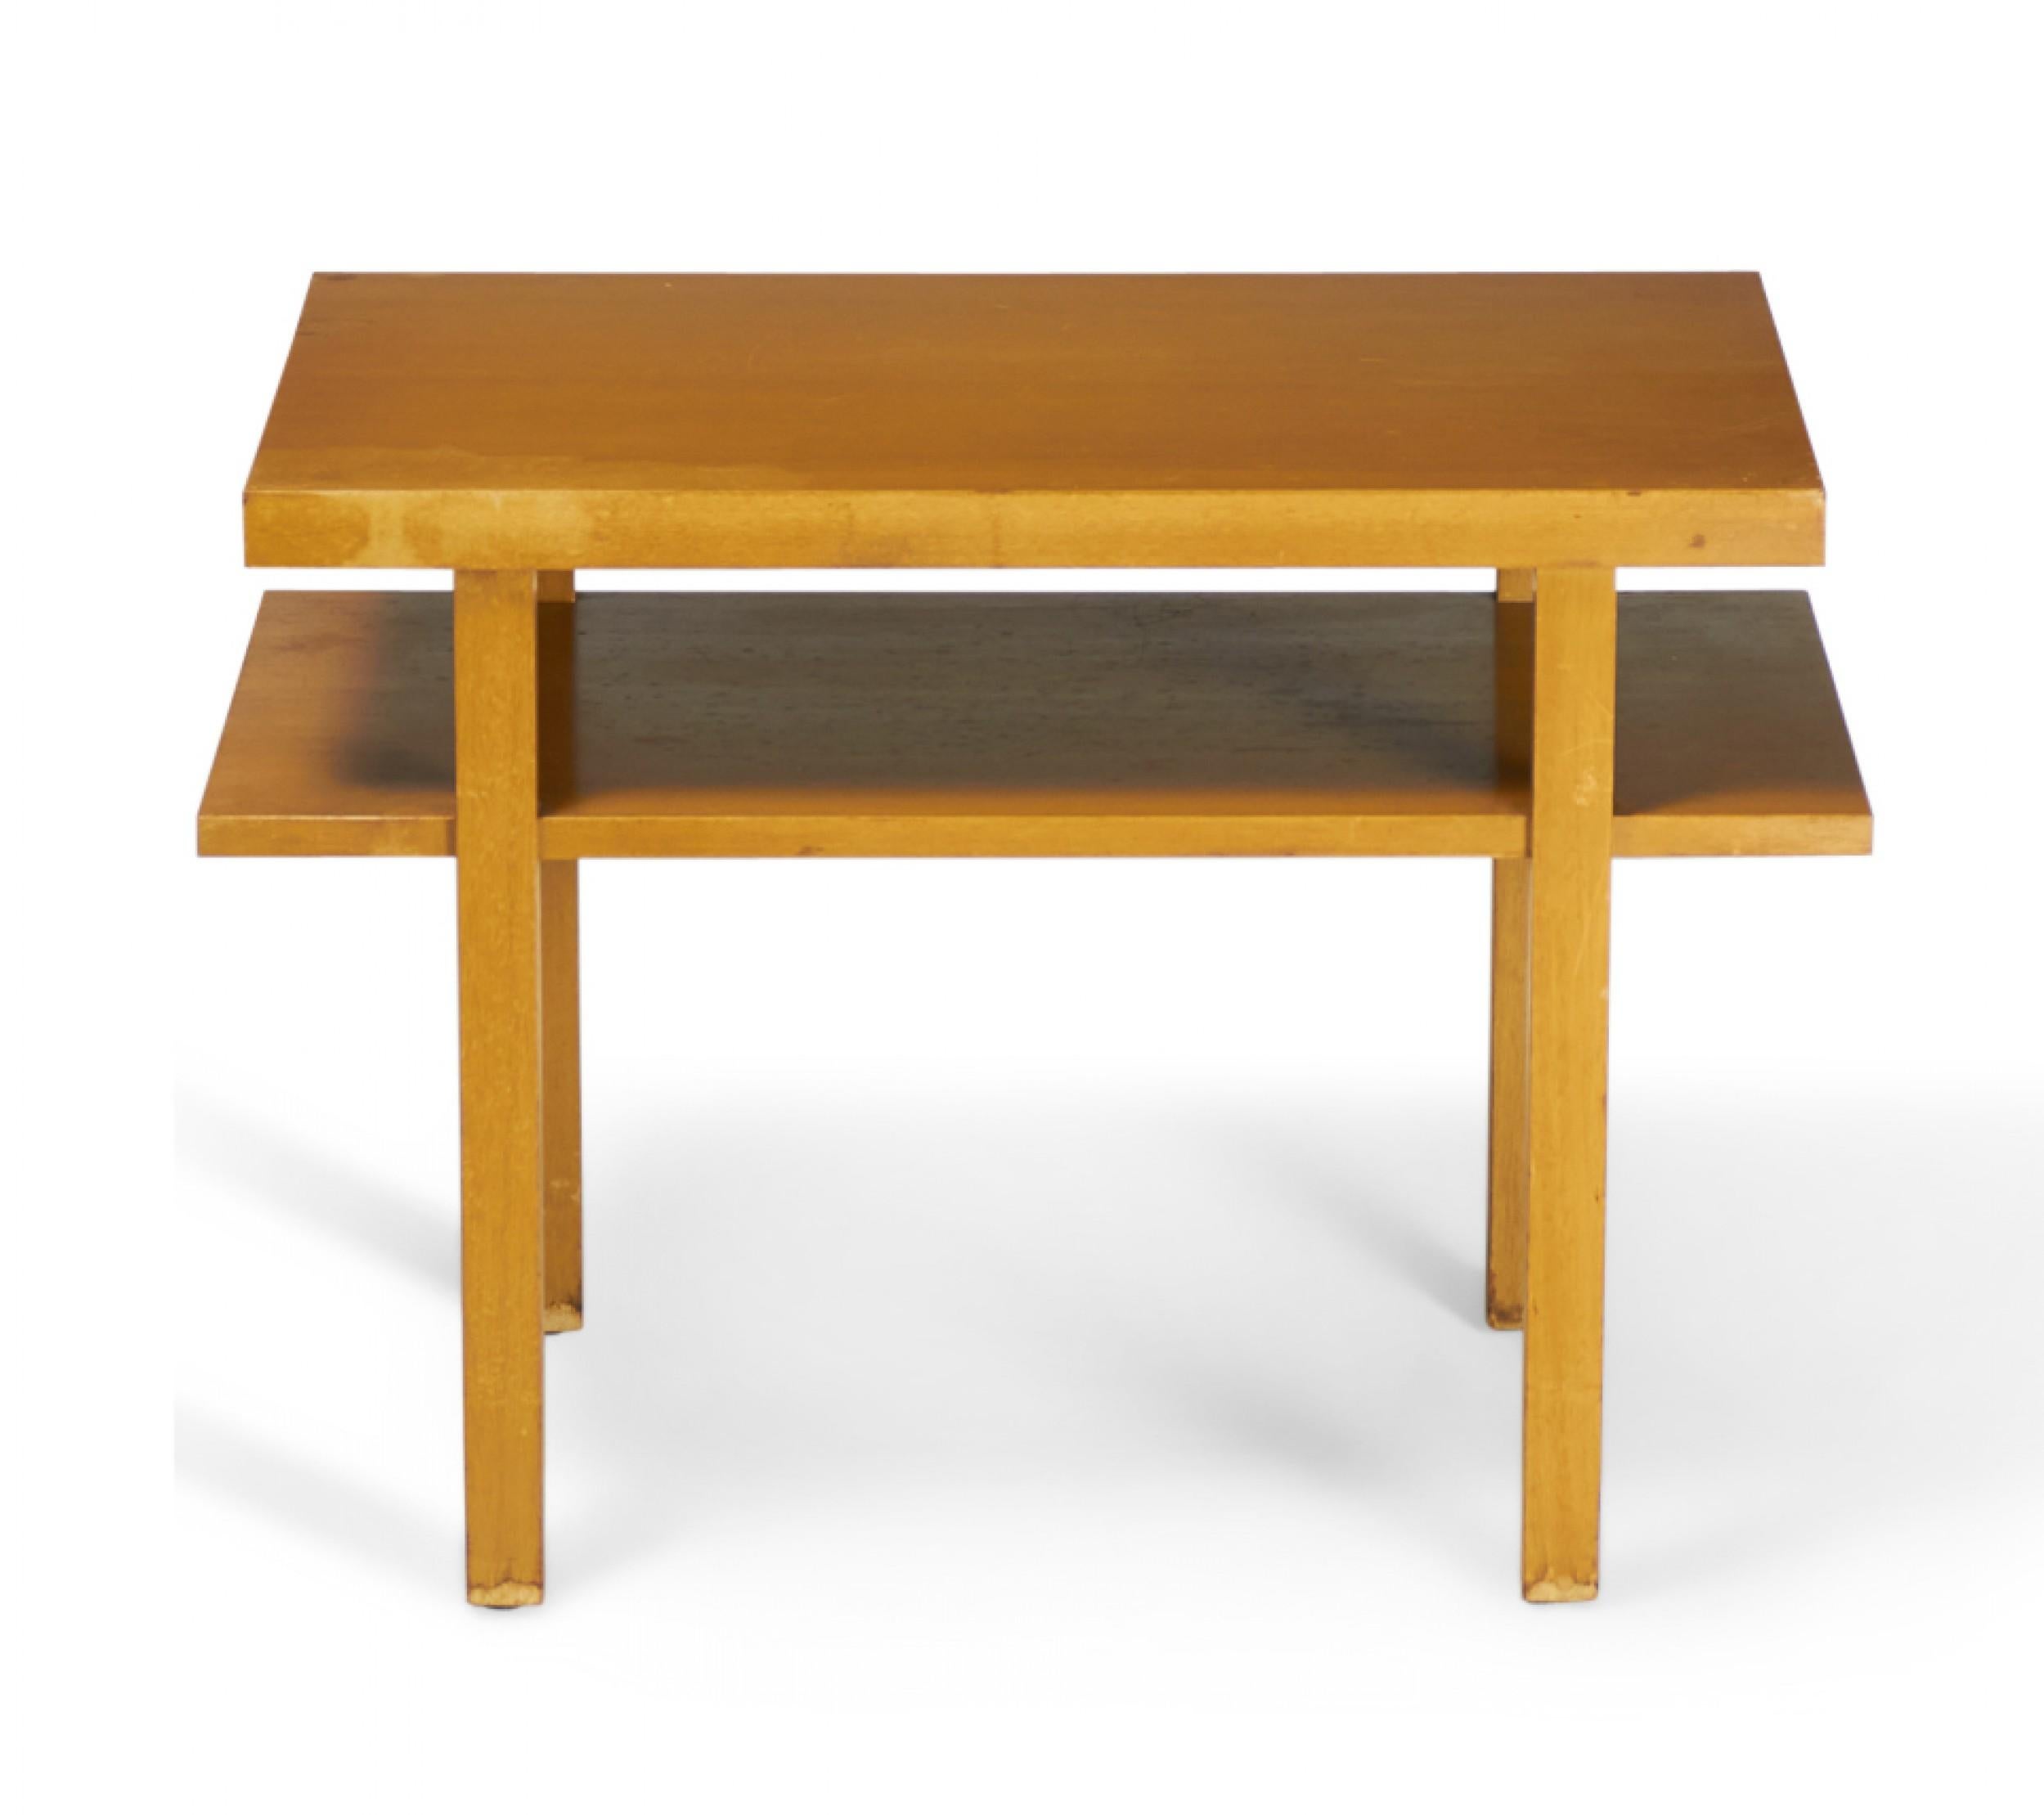 American mid-century (circa 1950) 'Cantilever' blond maple end / side table with a rectangular form, lower shelf that extends beyond the plane of the tabletop, and four square legs. (Widdicomb).
     